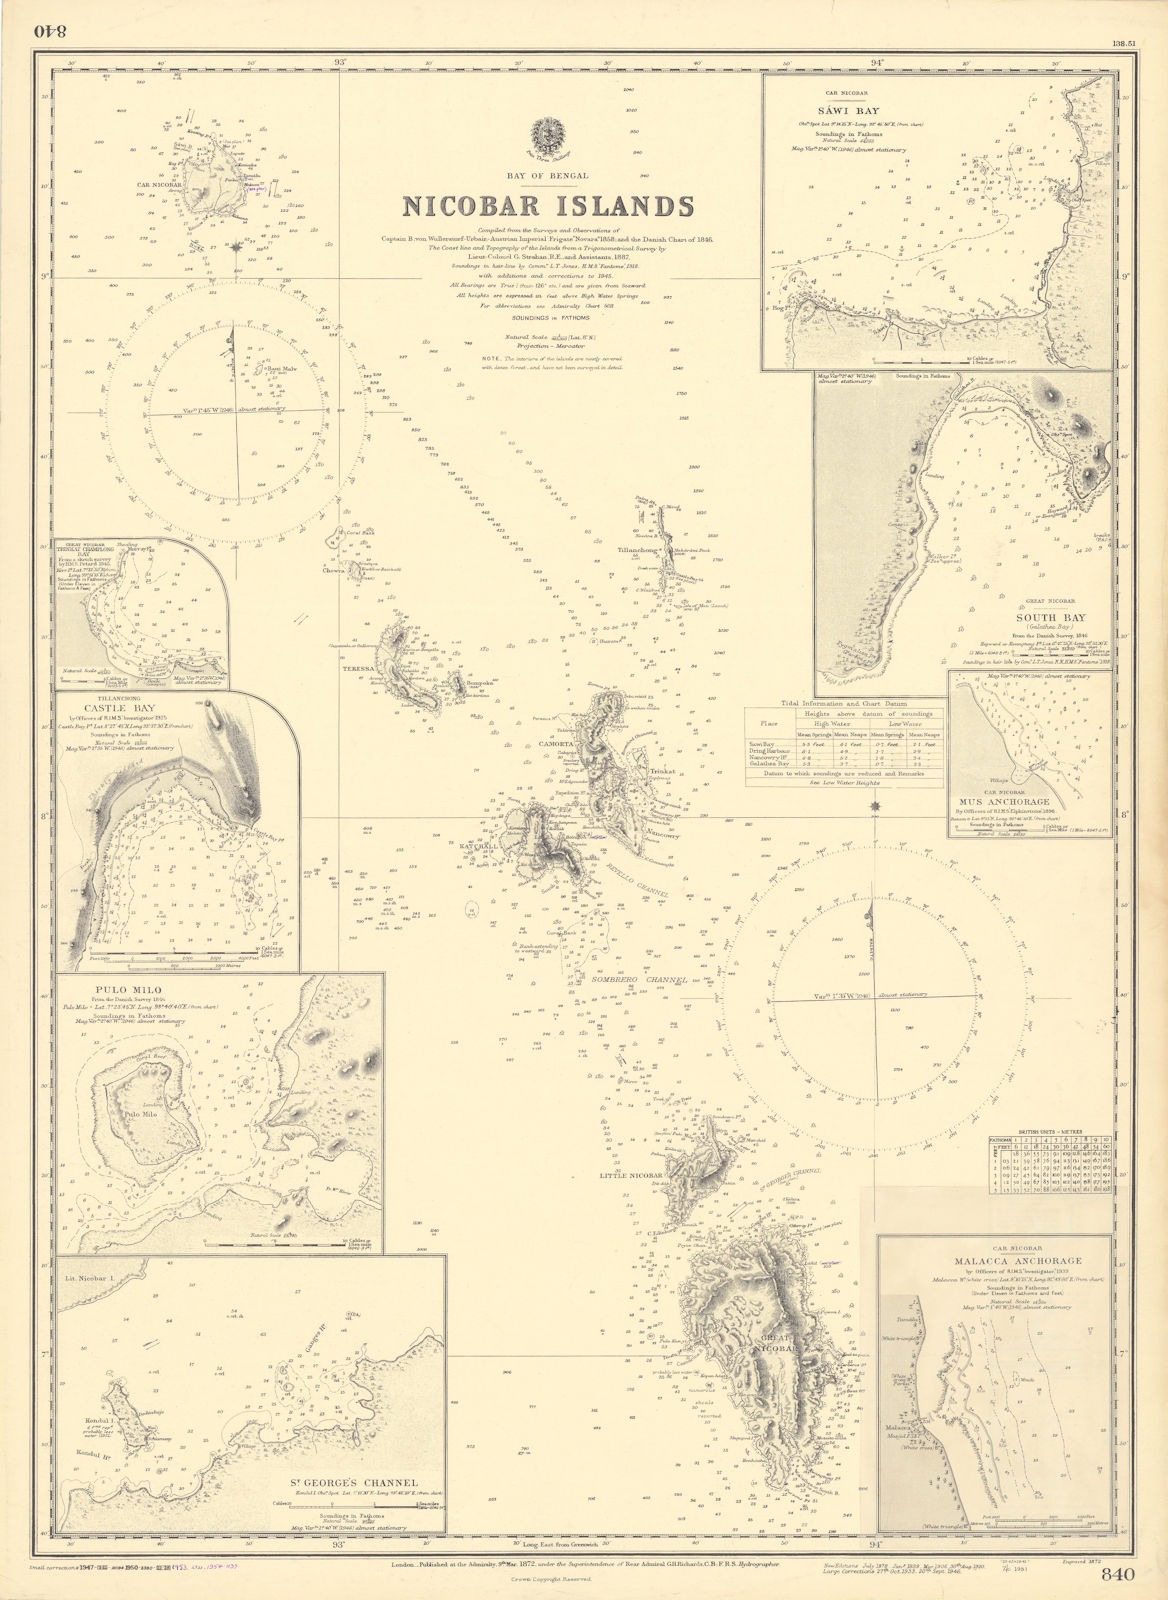 Nicobar Islands harbours India Bay of Bengal ADMIRALTY sea chart 1872 (1954) map